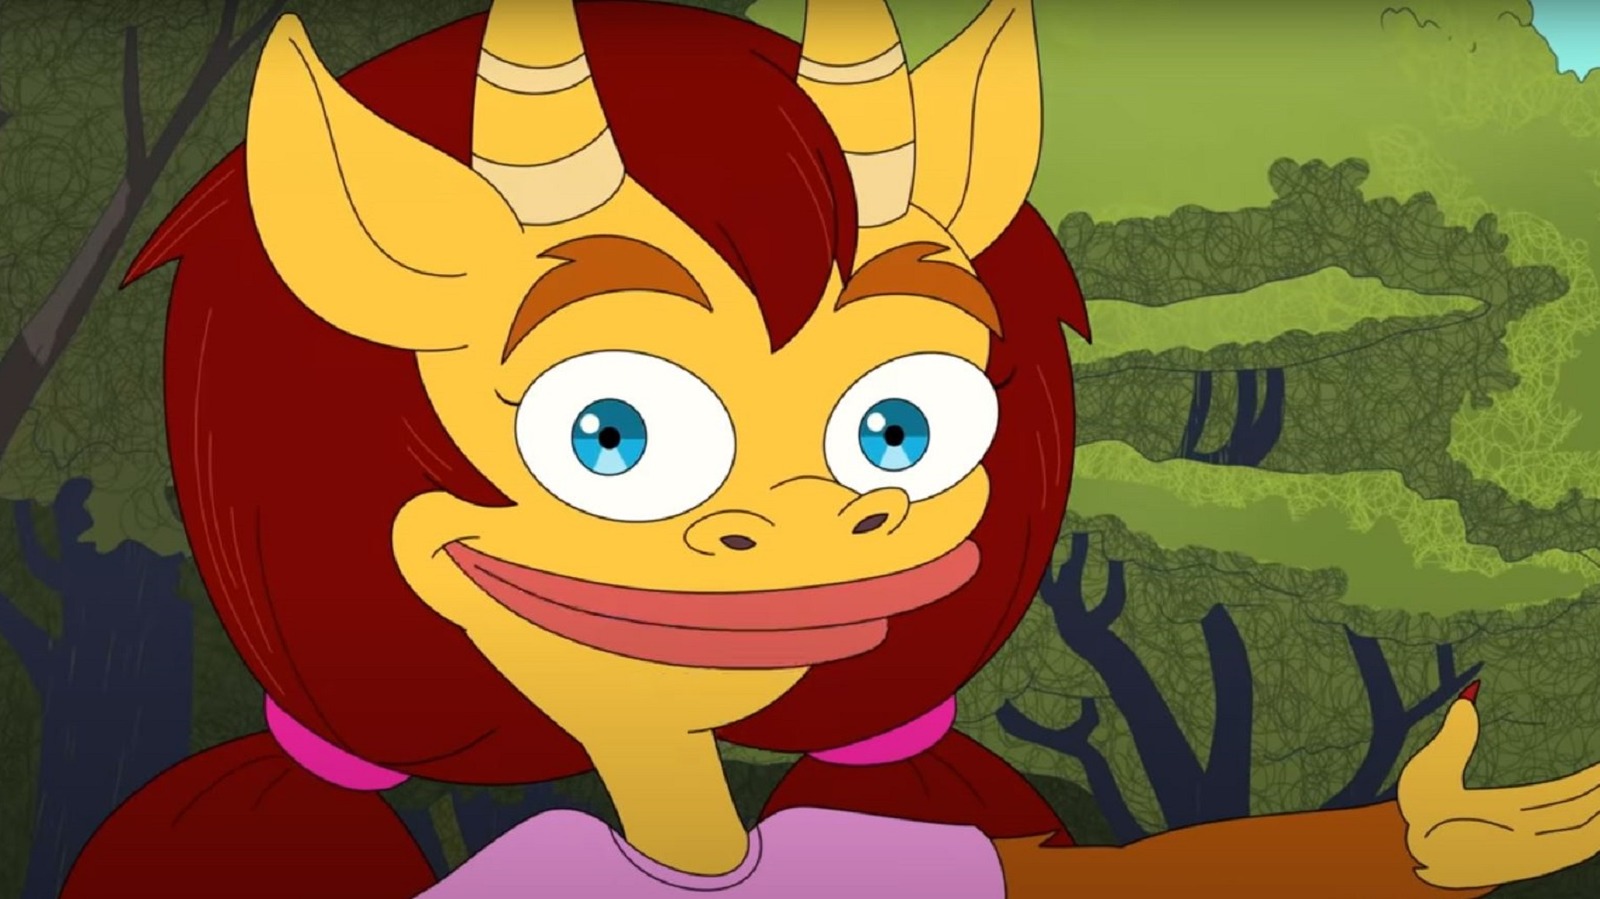 Big Mouth Season 4 Release Date, Episodes And Cast - What We Know So Far